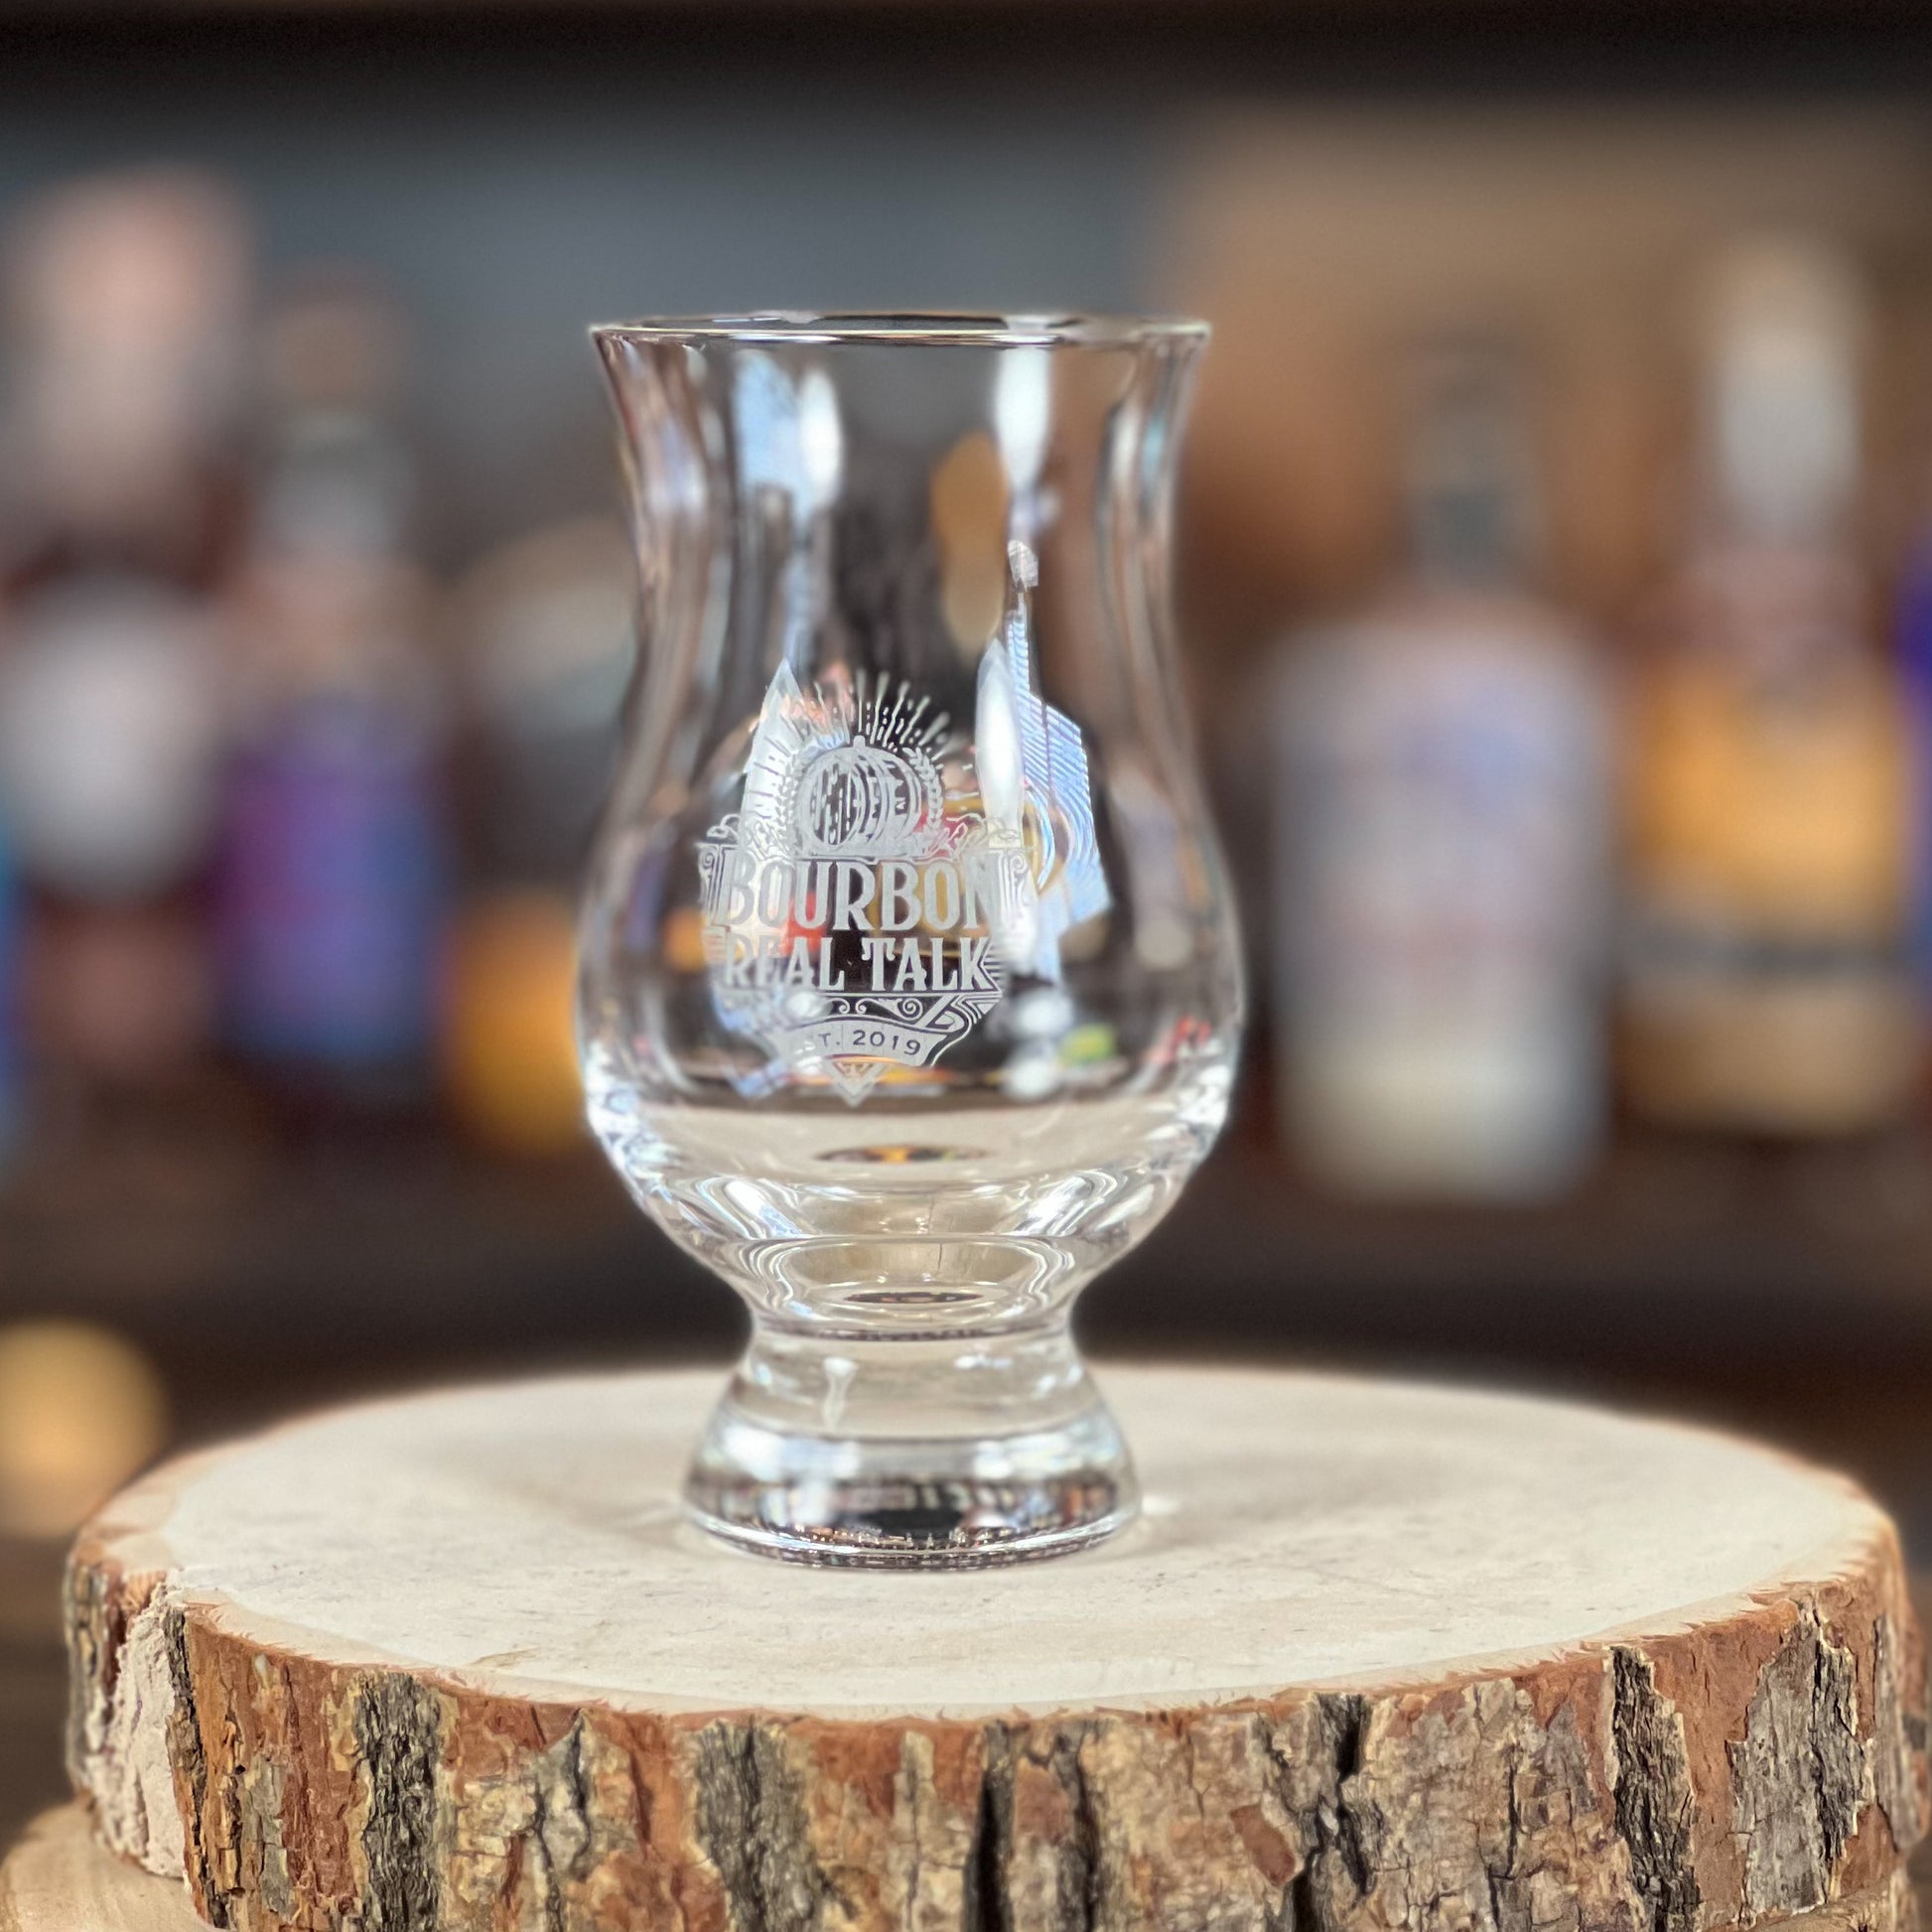 This photo shows one whiskey tasting nosing glass  on a wooden block with whiskey bottles in the background.